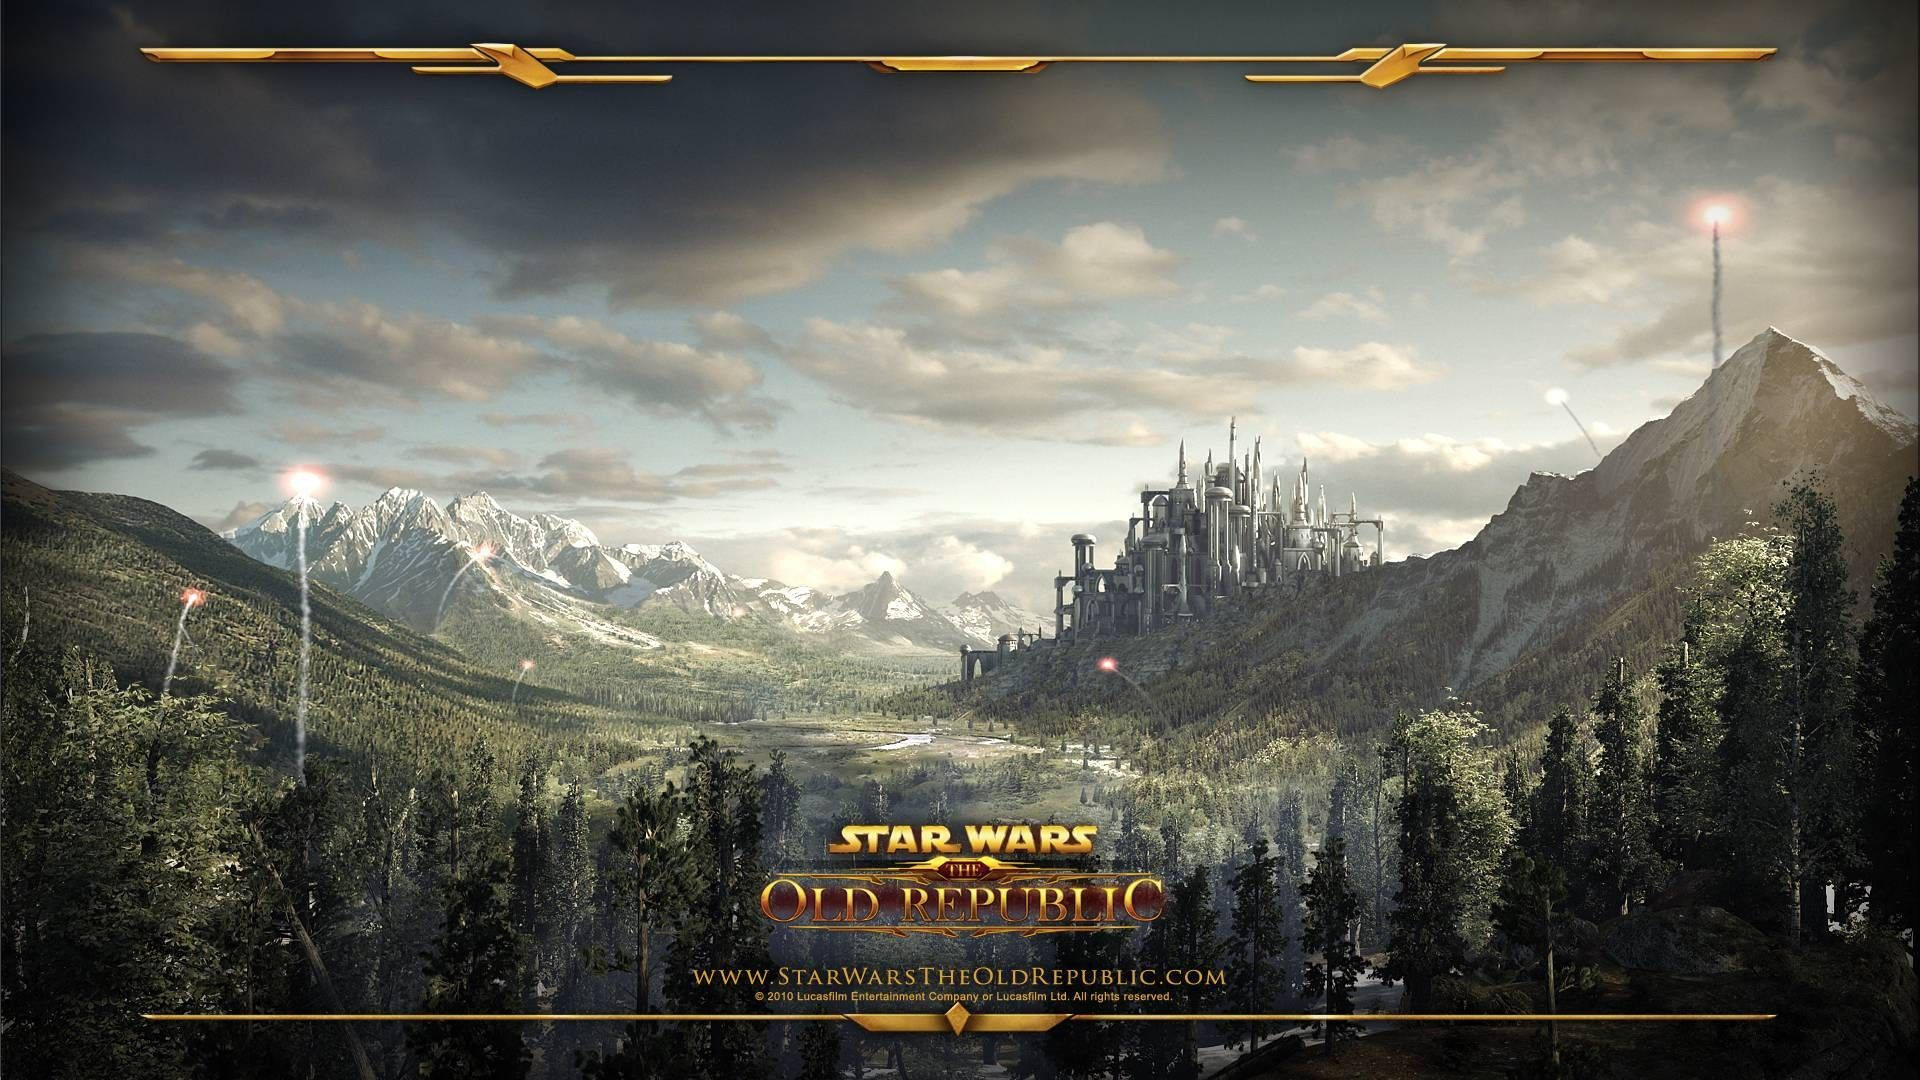 Swtor Fortress In Mountain Background